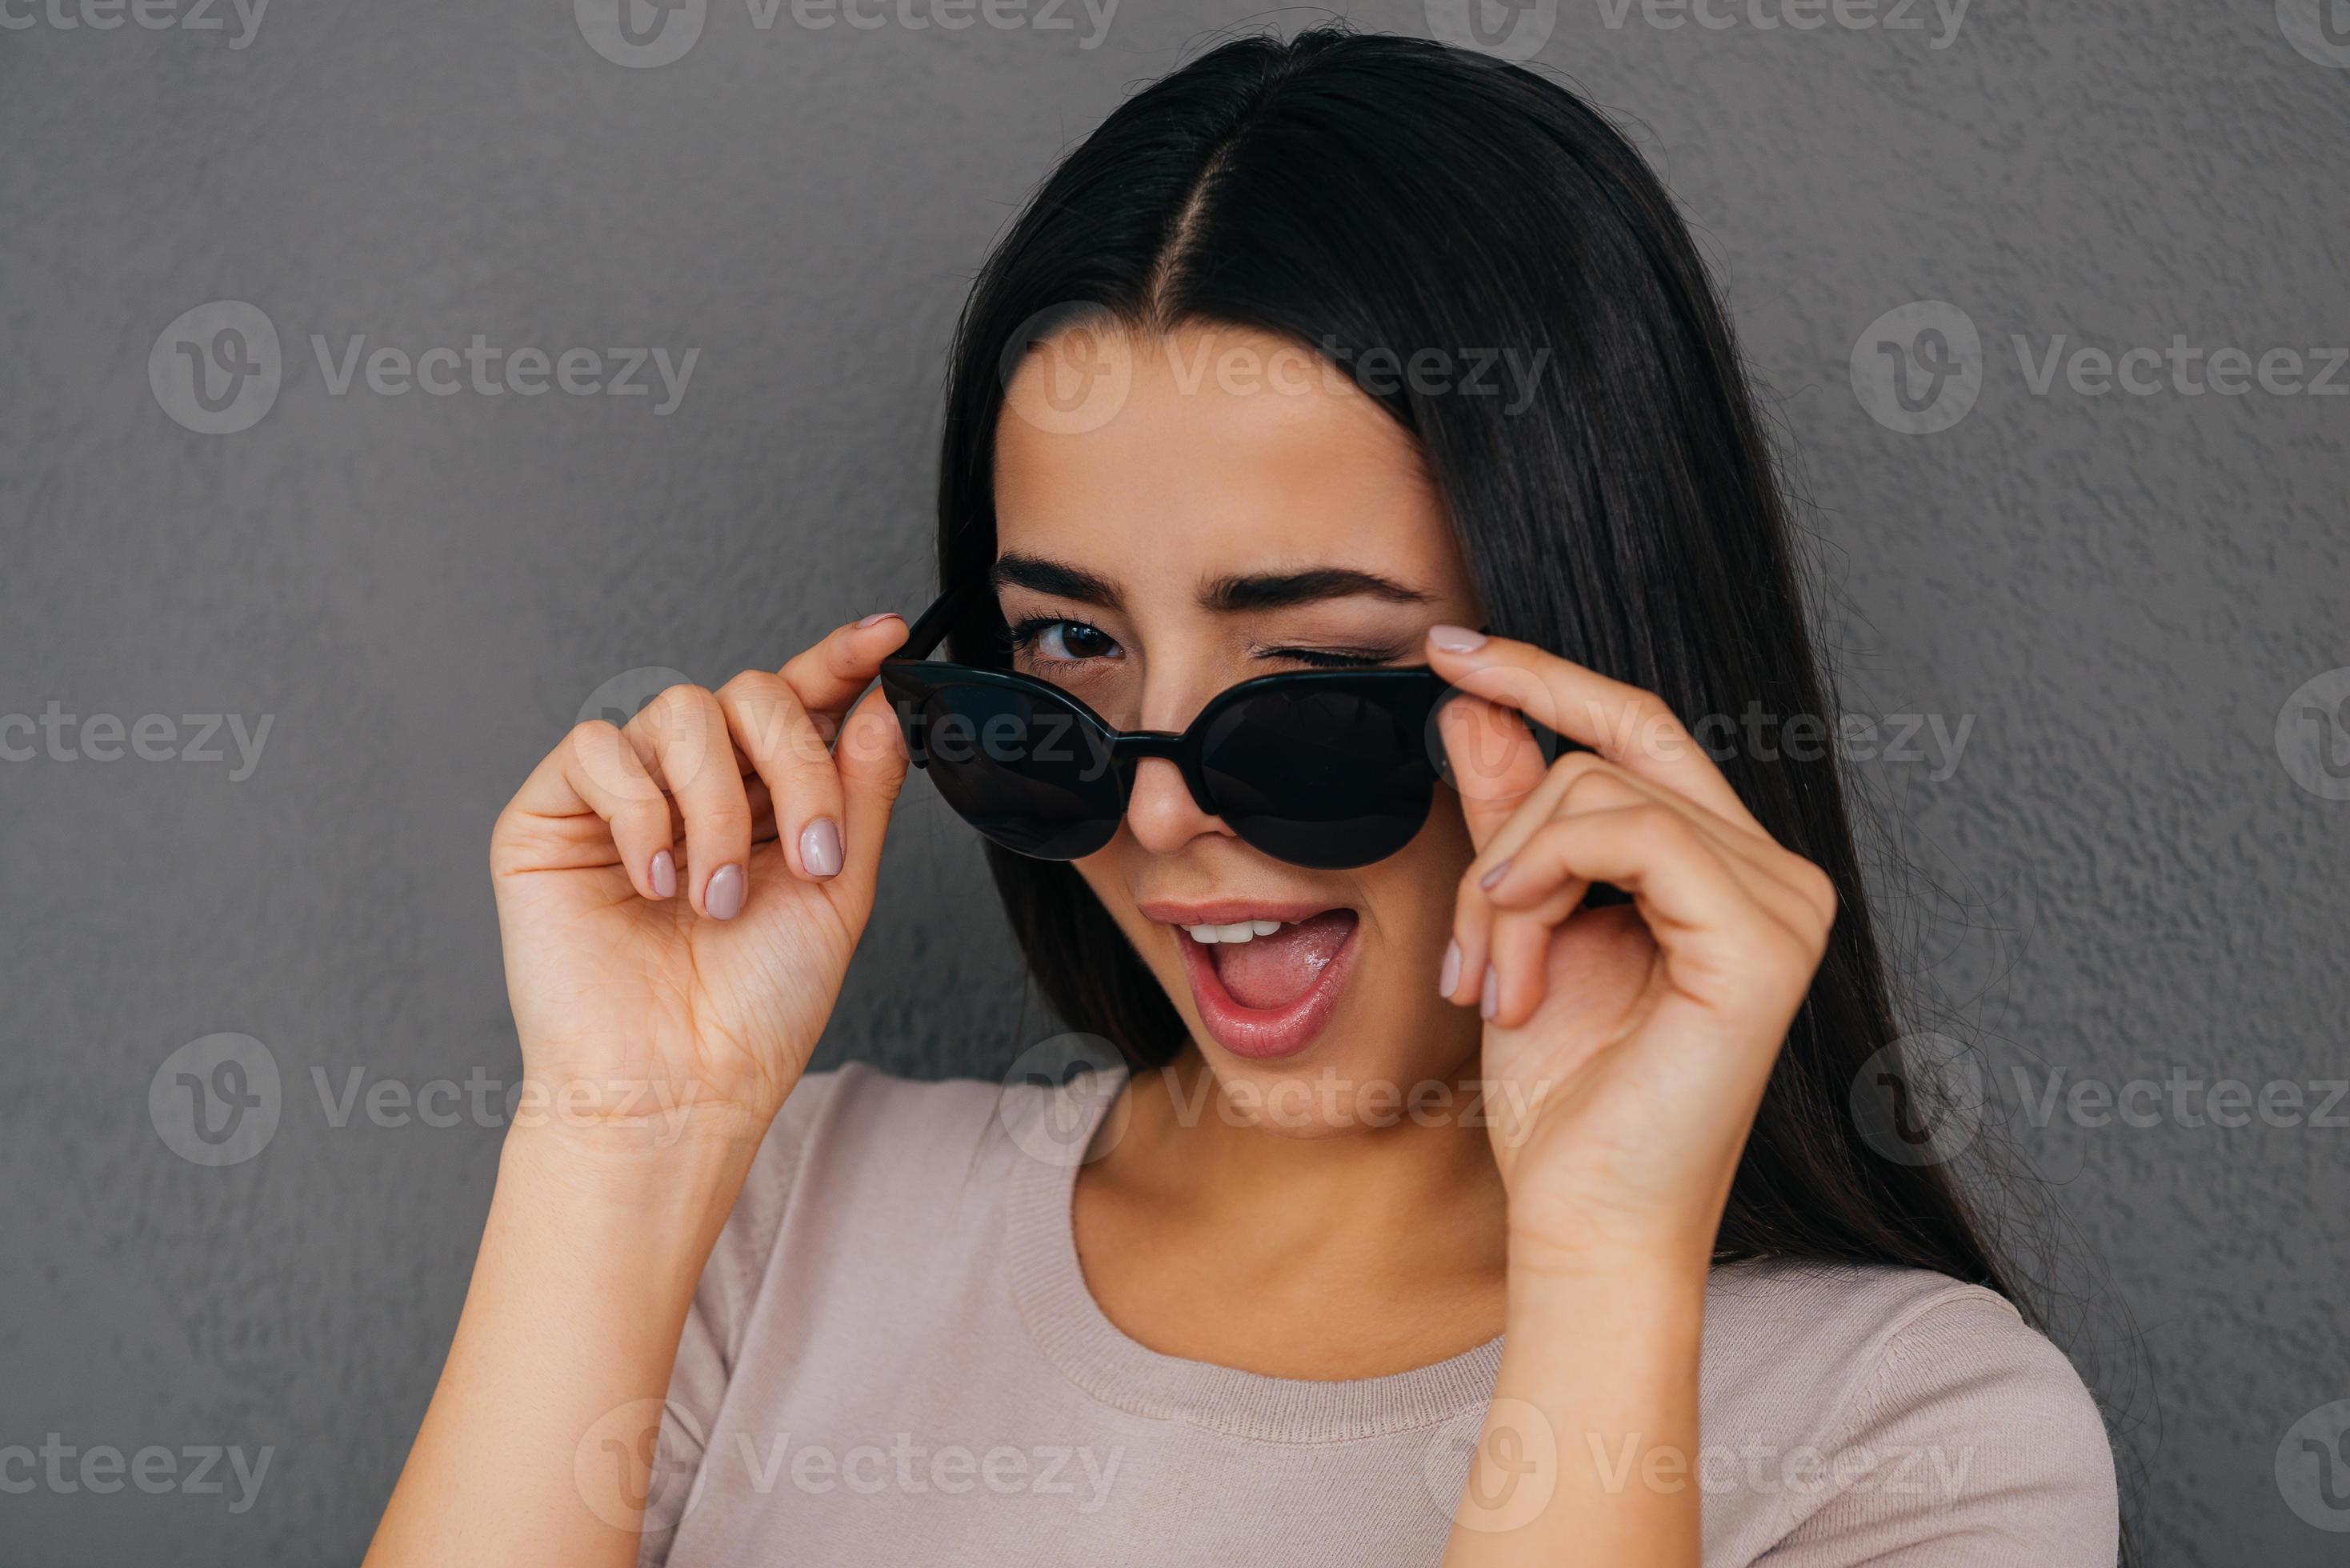 Feeling flirty. Playful young woman adjusting her sunglasses and